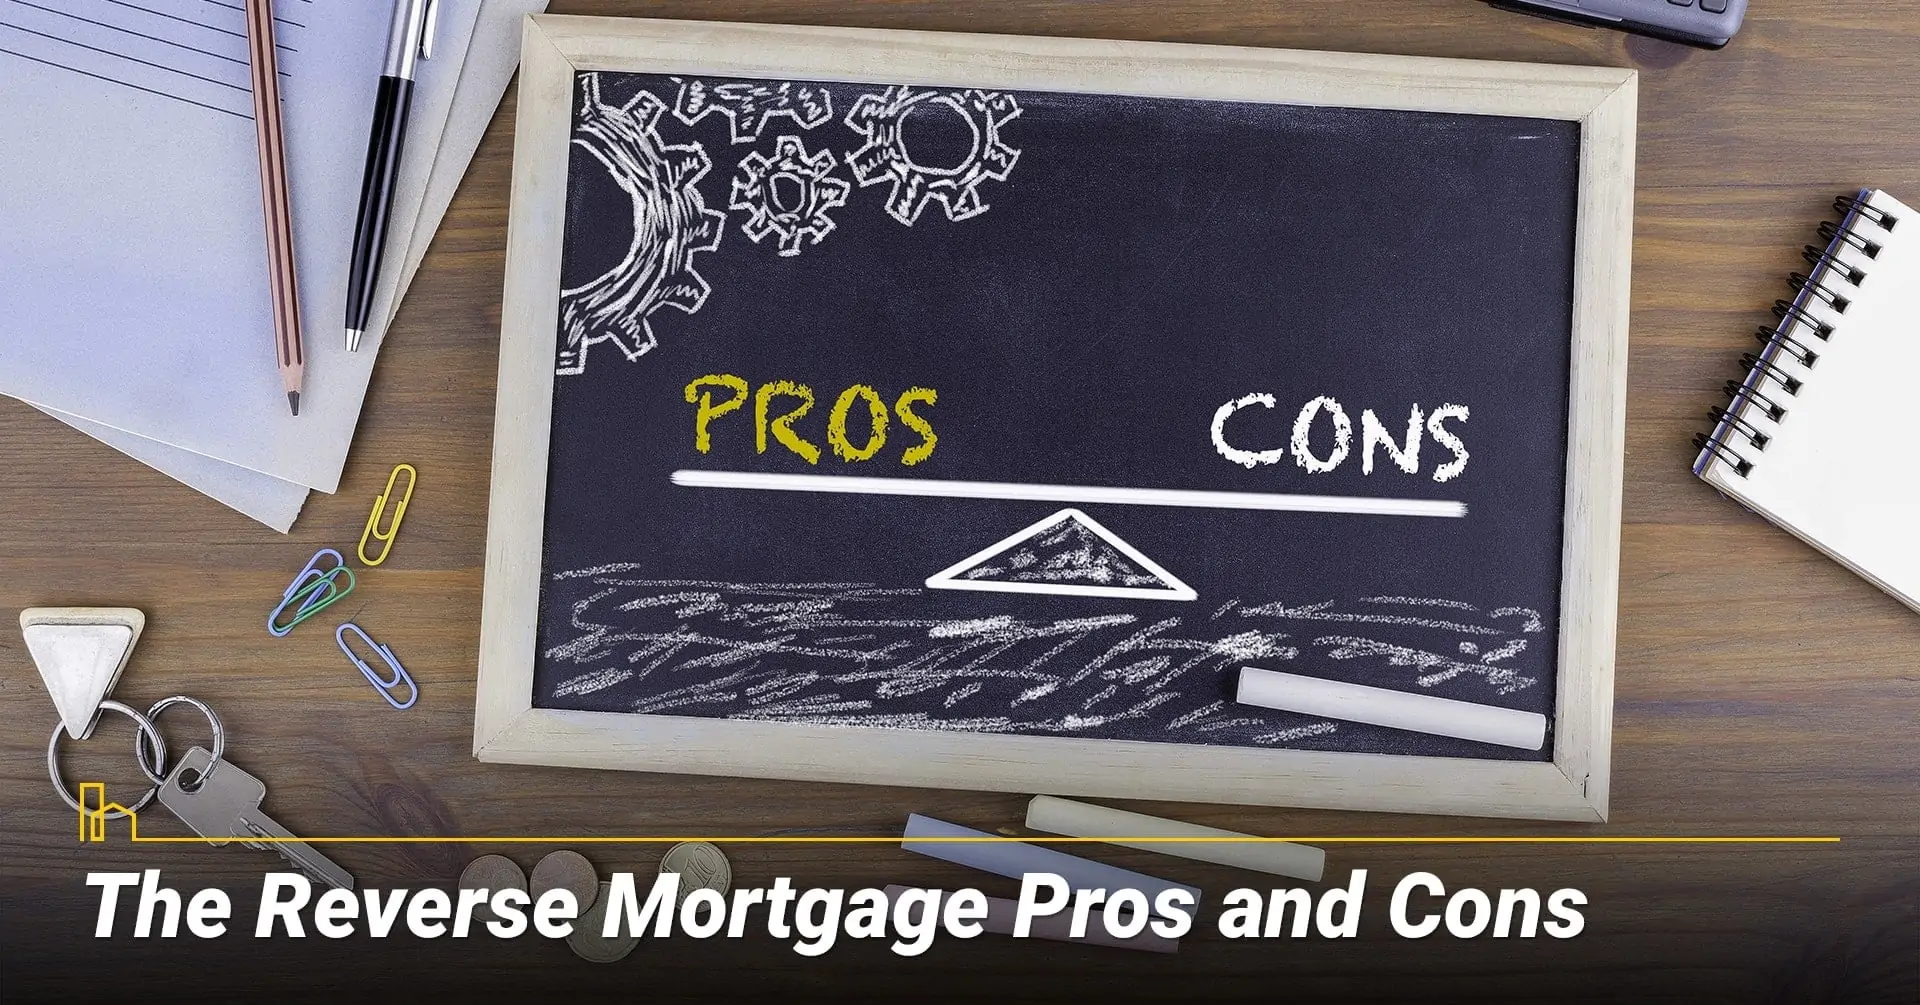 What are the Reverse Mortgage Pros and Cons? pluses and minuses of a reverse mortgage